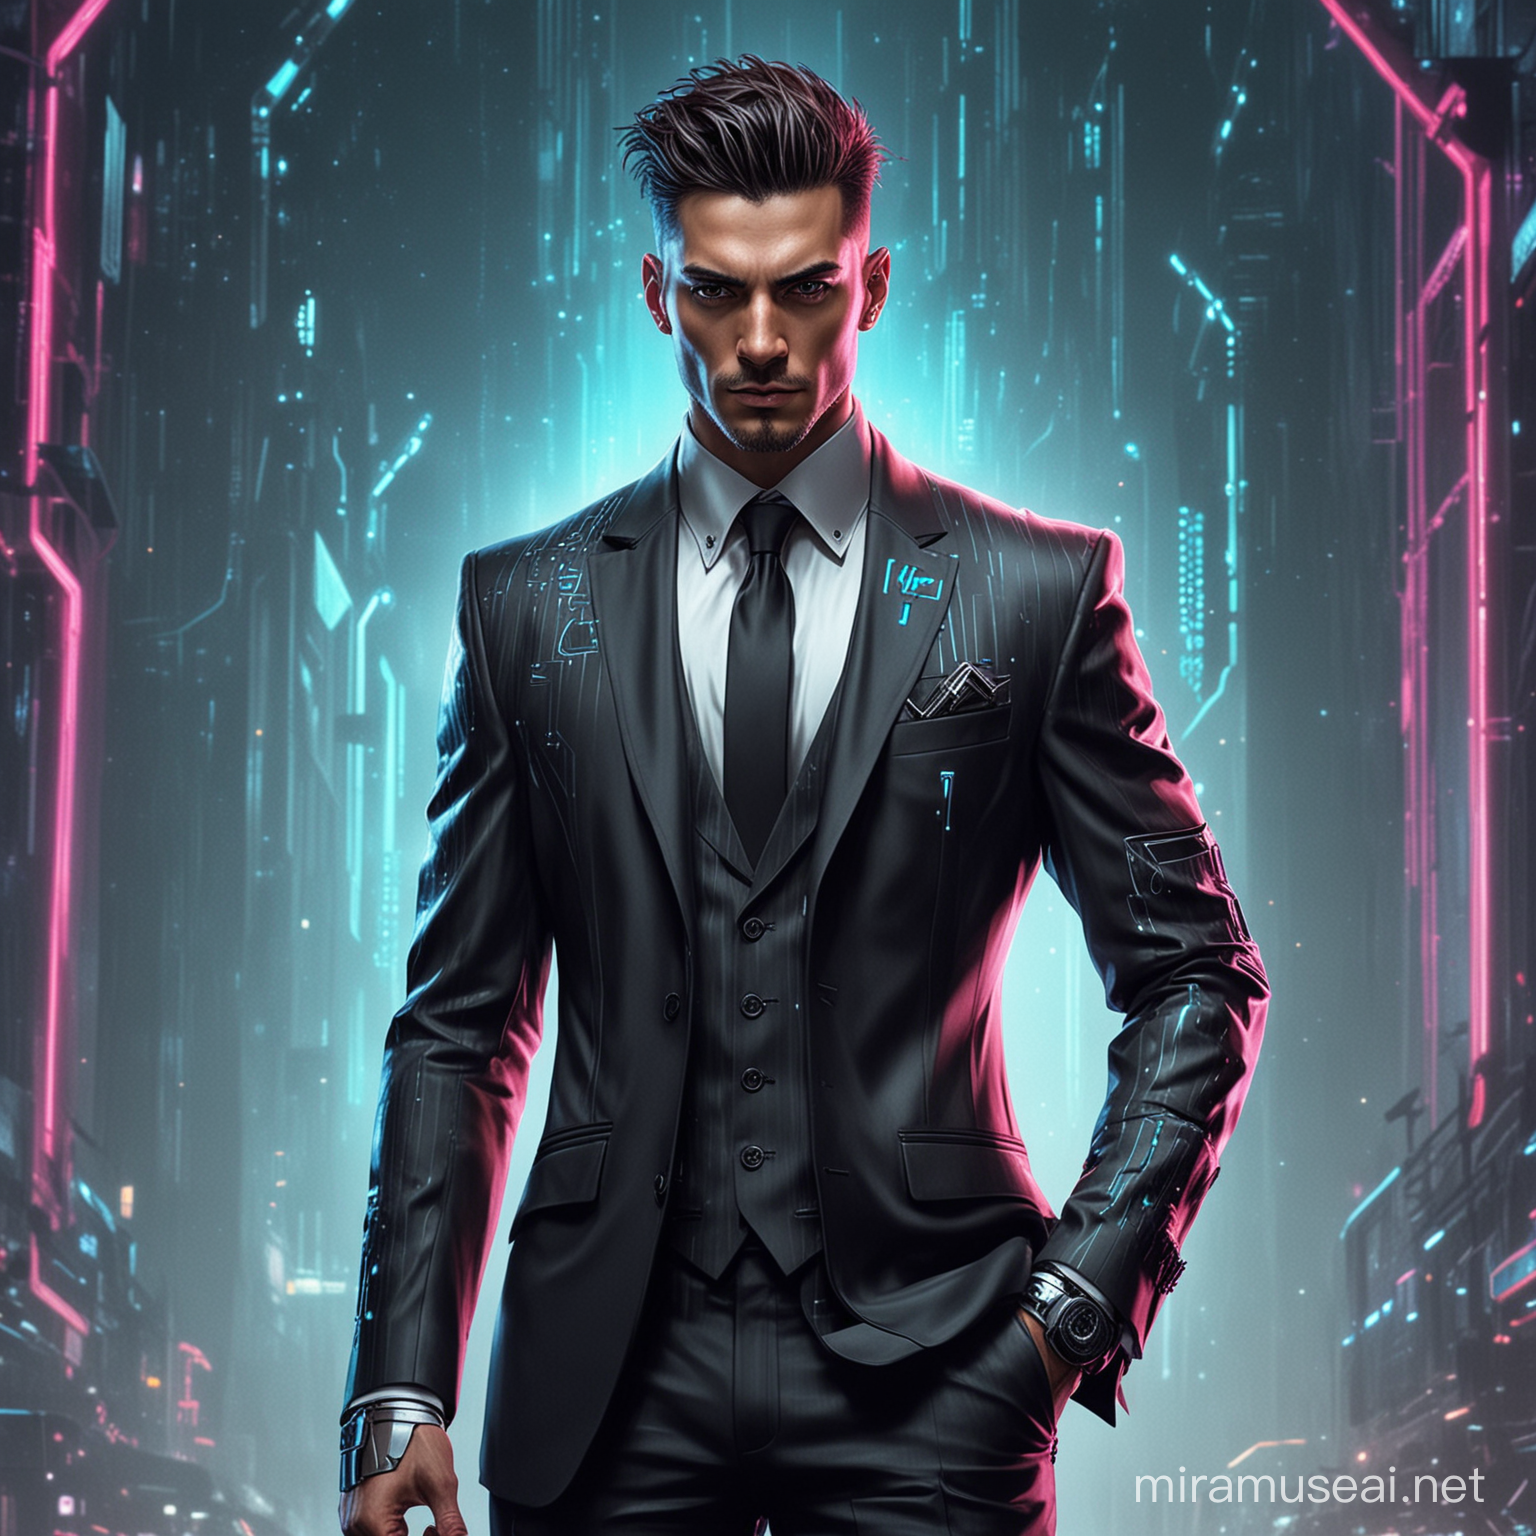 cyber punk man in an elegant suit, with futuristic background also cyberpunk looking forward